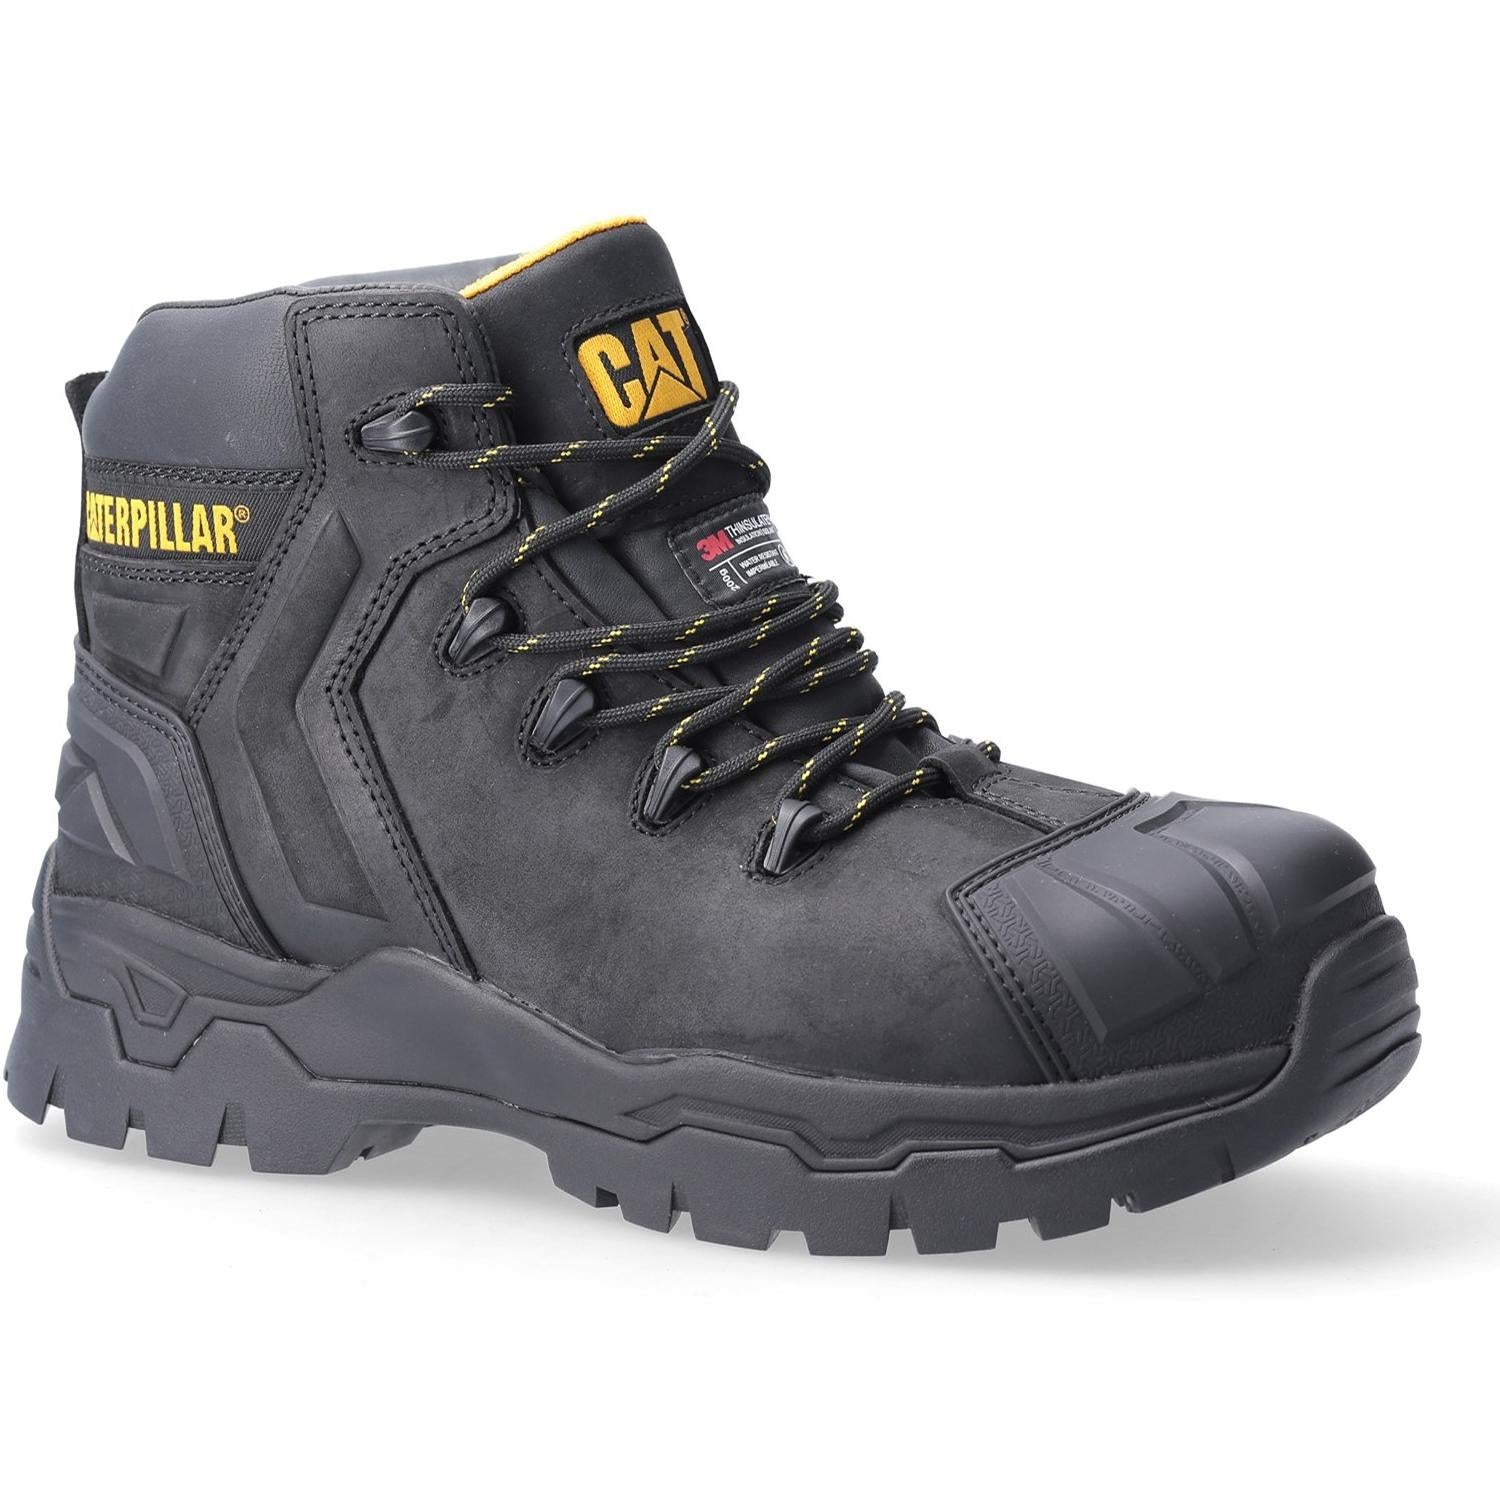 Cat Footwear Everett S3 WP Safety Boot